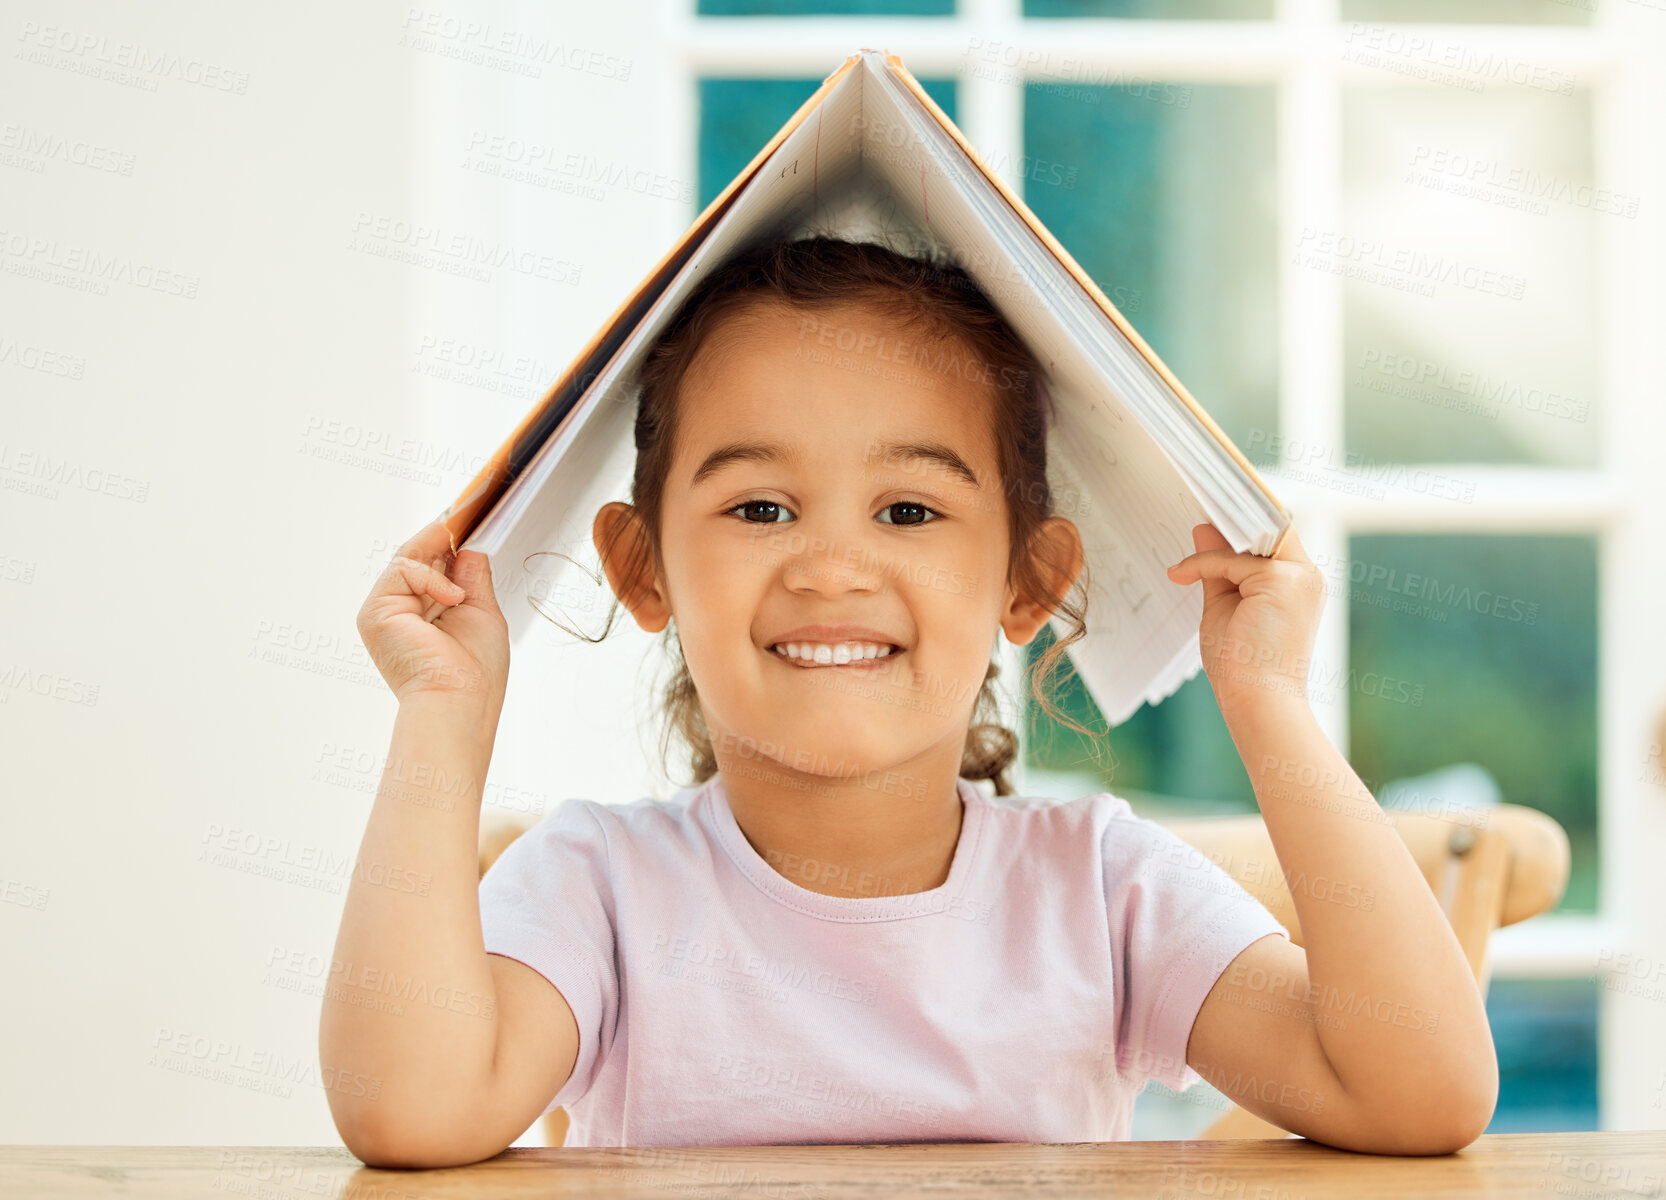 Buy stock photo Cropped portrait of an adorable little girl messing around with her textbook while doing her homework